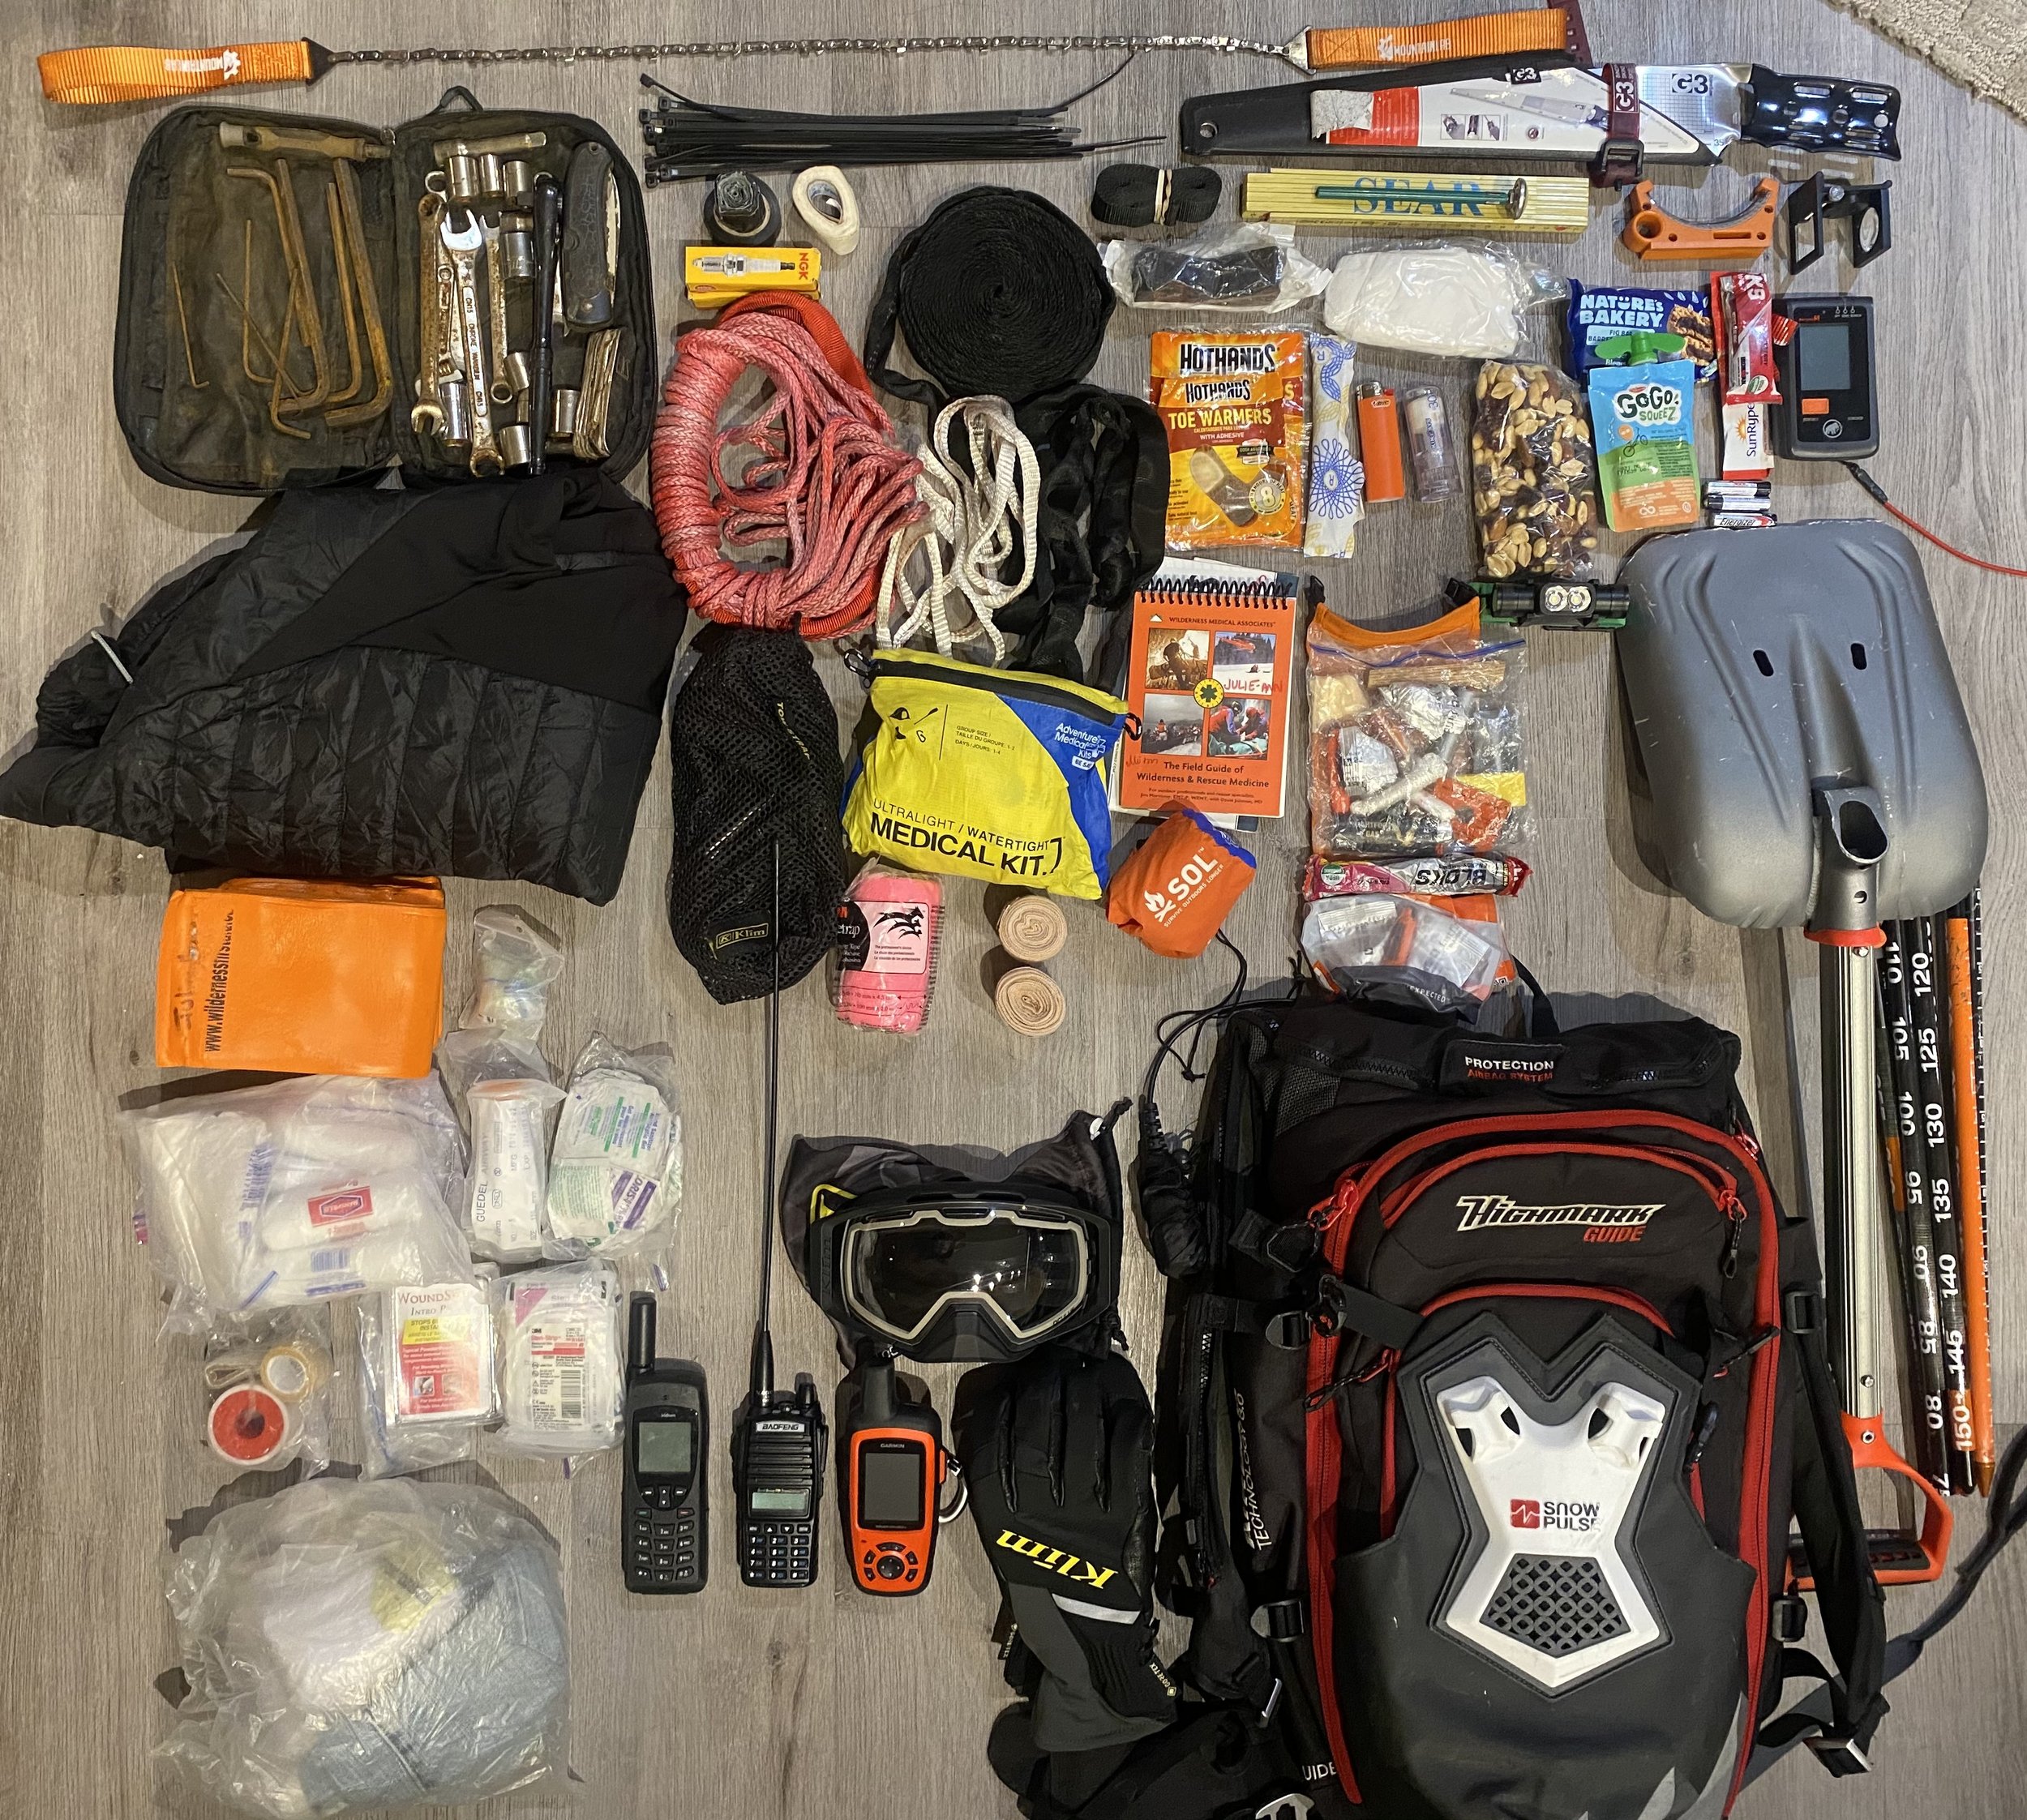 Hiking and Backpacking rental package - Two person, Kit